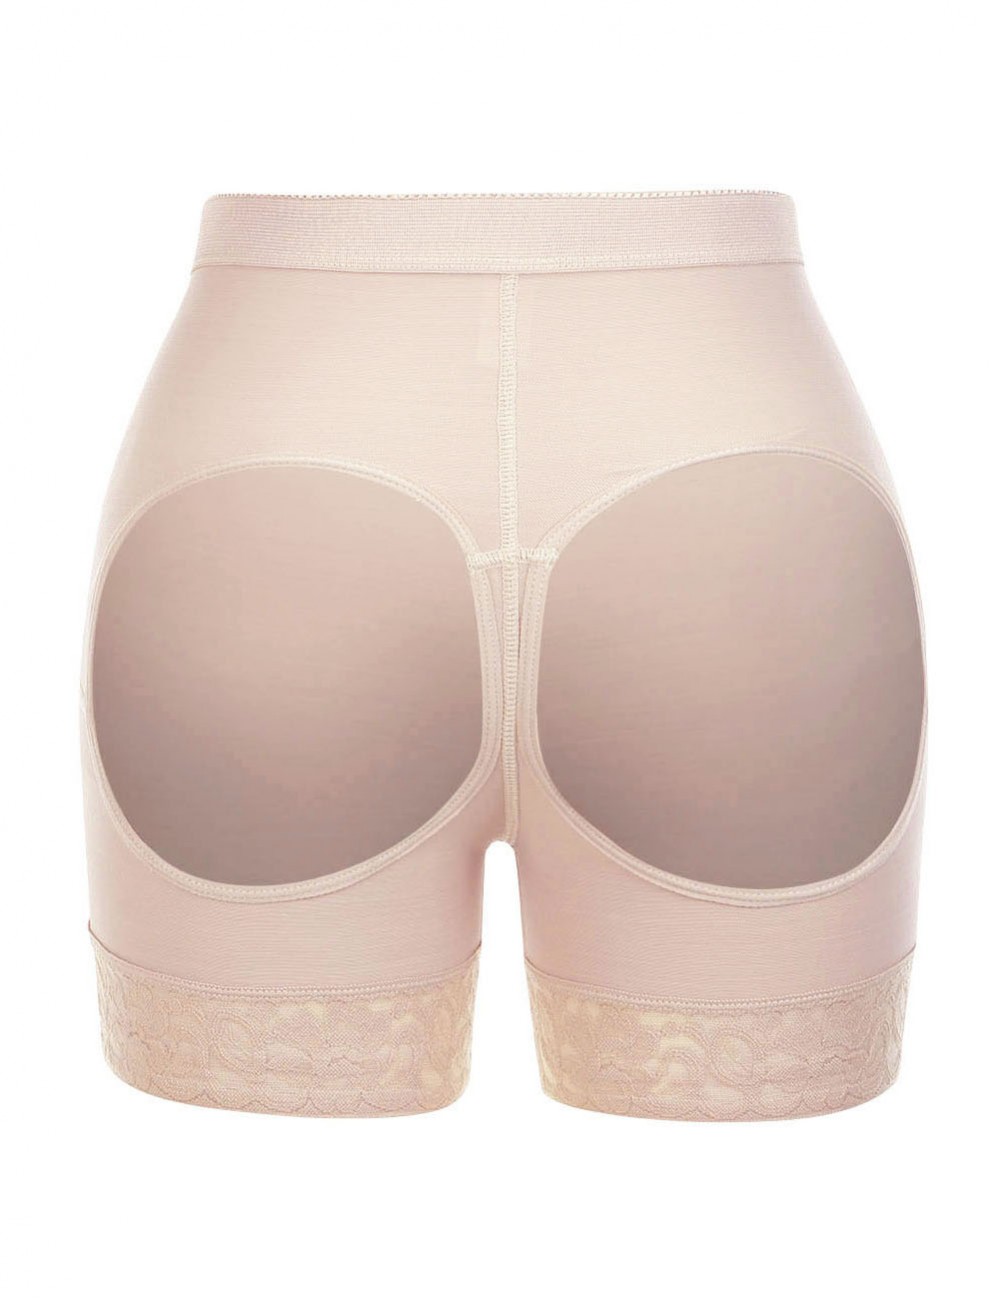 Tummy Control Nude Wide Elastic Band Butt Enhancer Panty Crotchless Slim